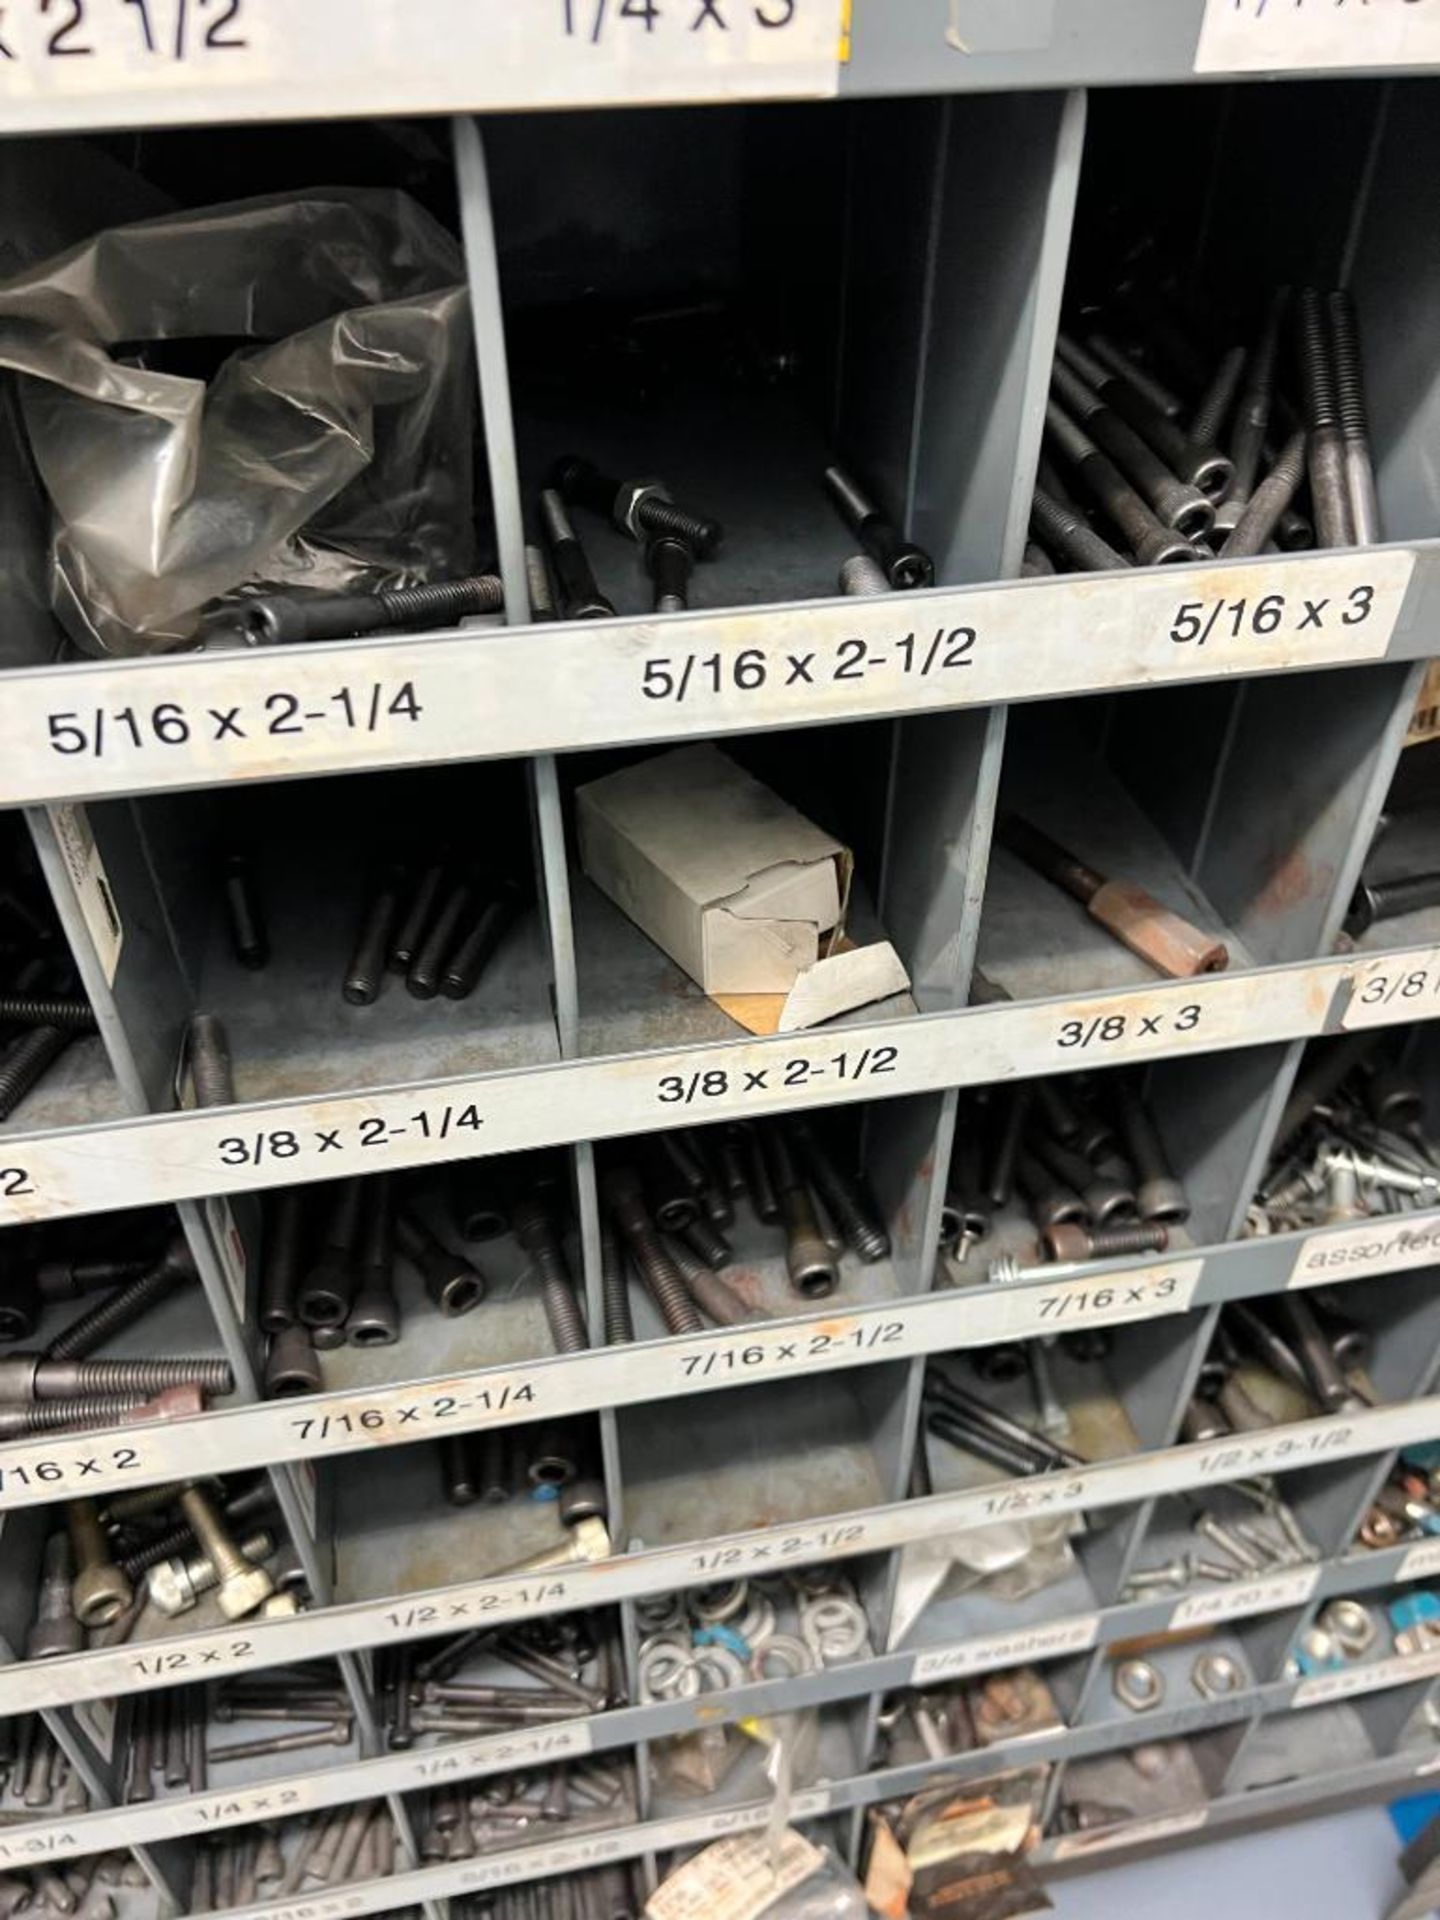 (28) Shelves of Assorted Parts, VERY LARGE LOT Consisting of MRO, Drives, Valves, PLC, Nuts, Bolts, - Image 16 of 67